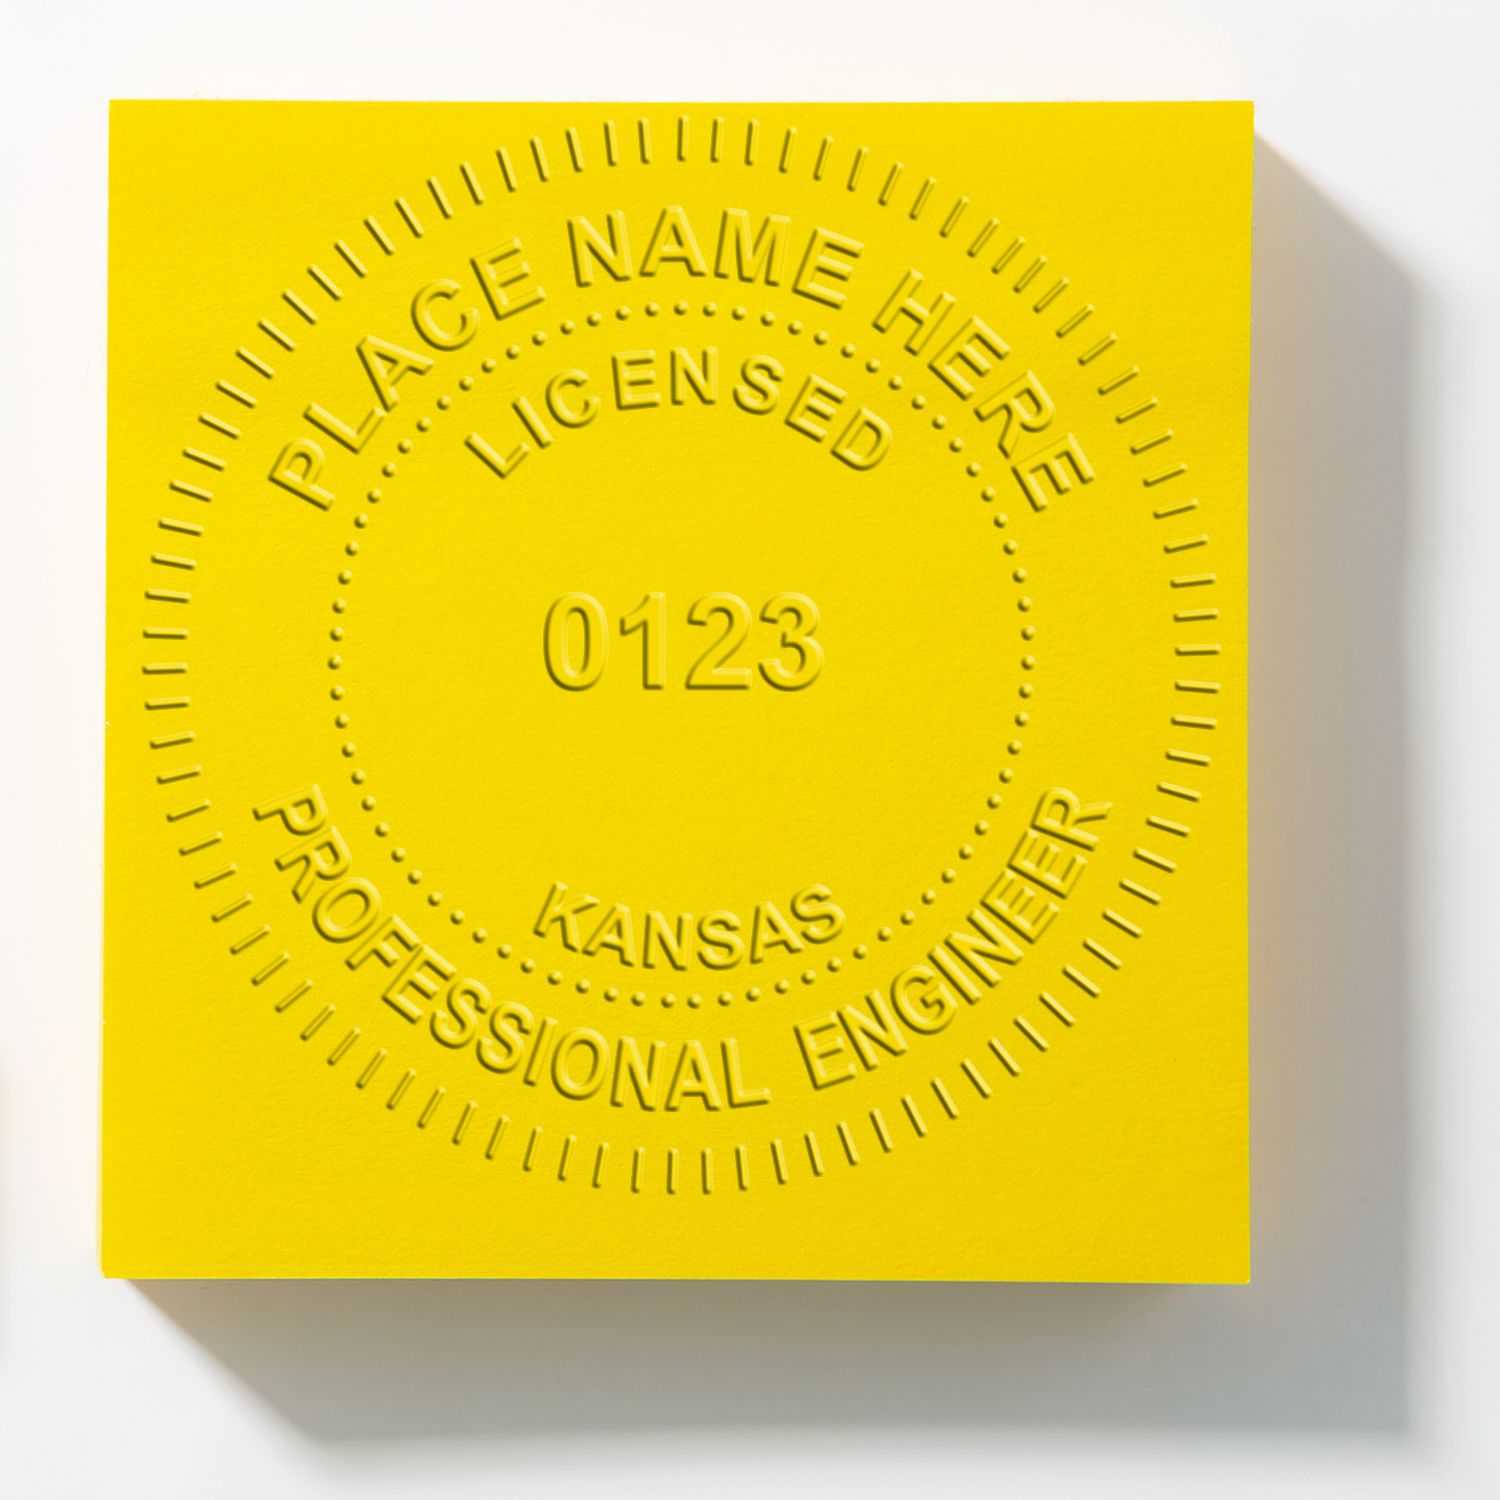 The main image for the State of Kansas Extended Long Reach Engineer Seal depicting a sample of the imprint and electronic files